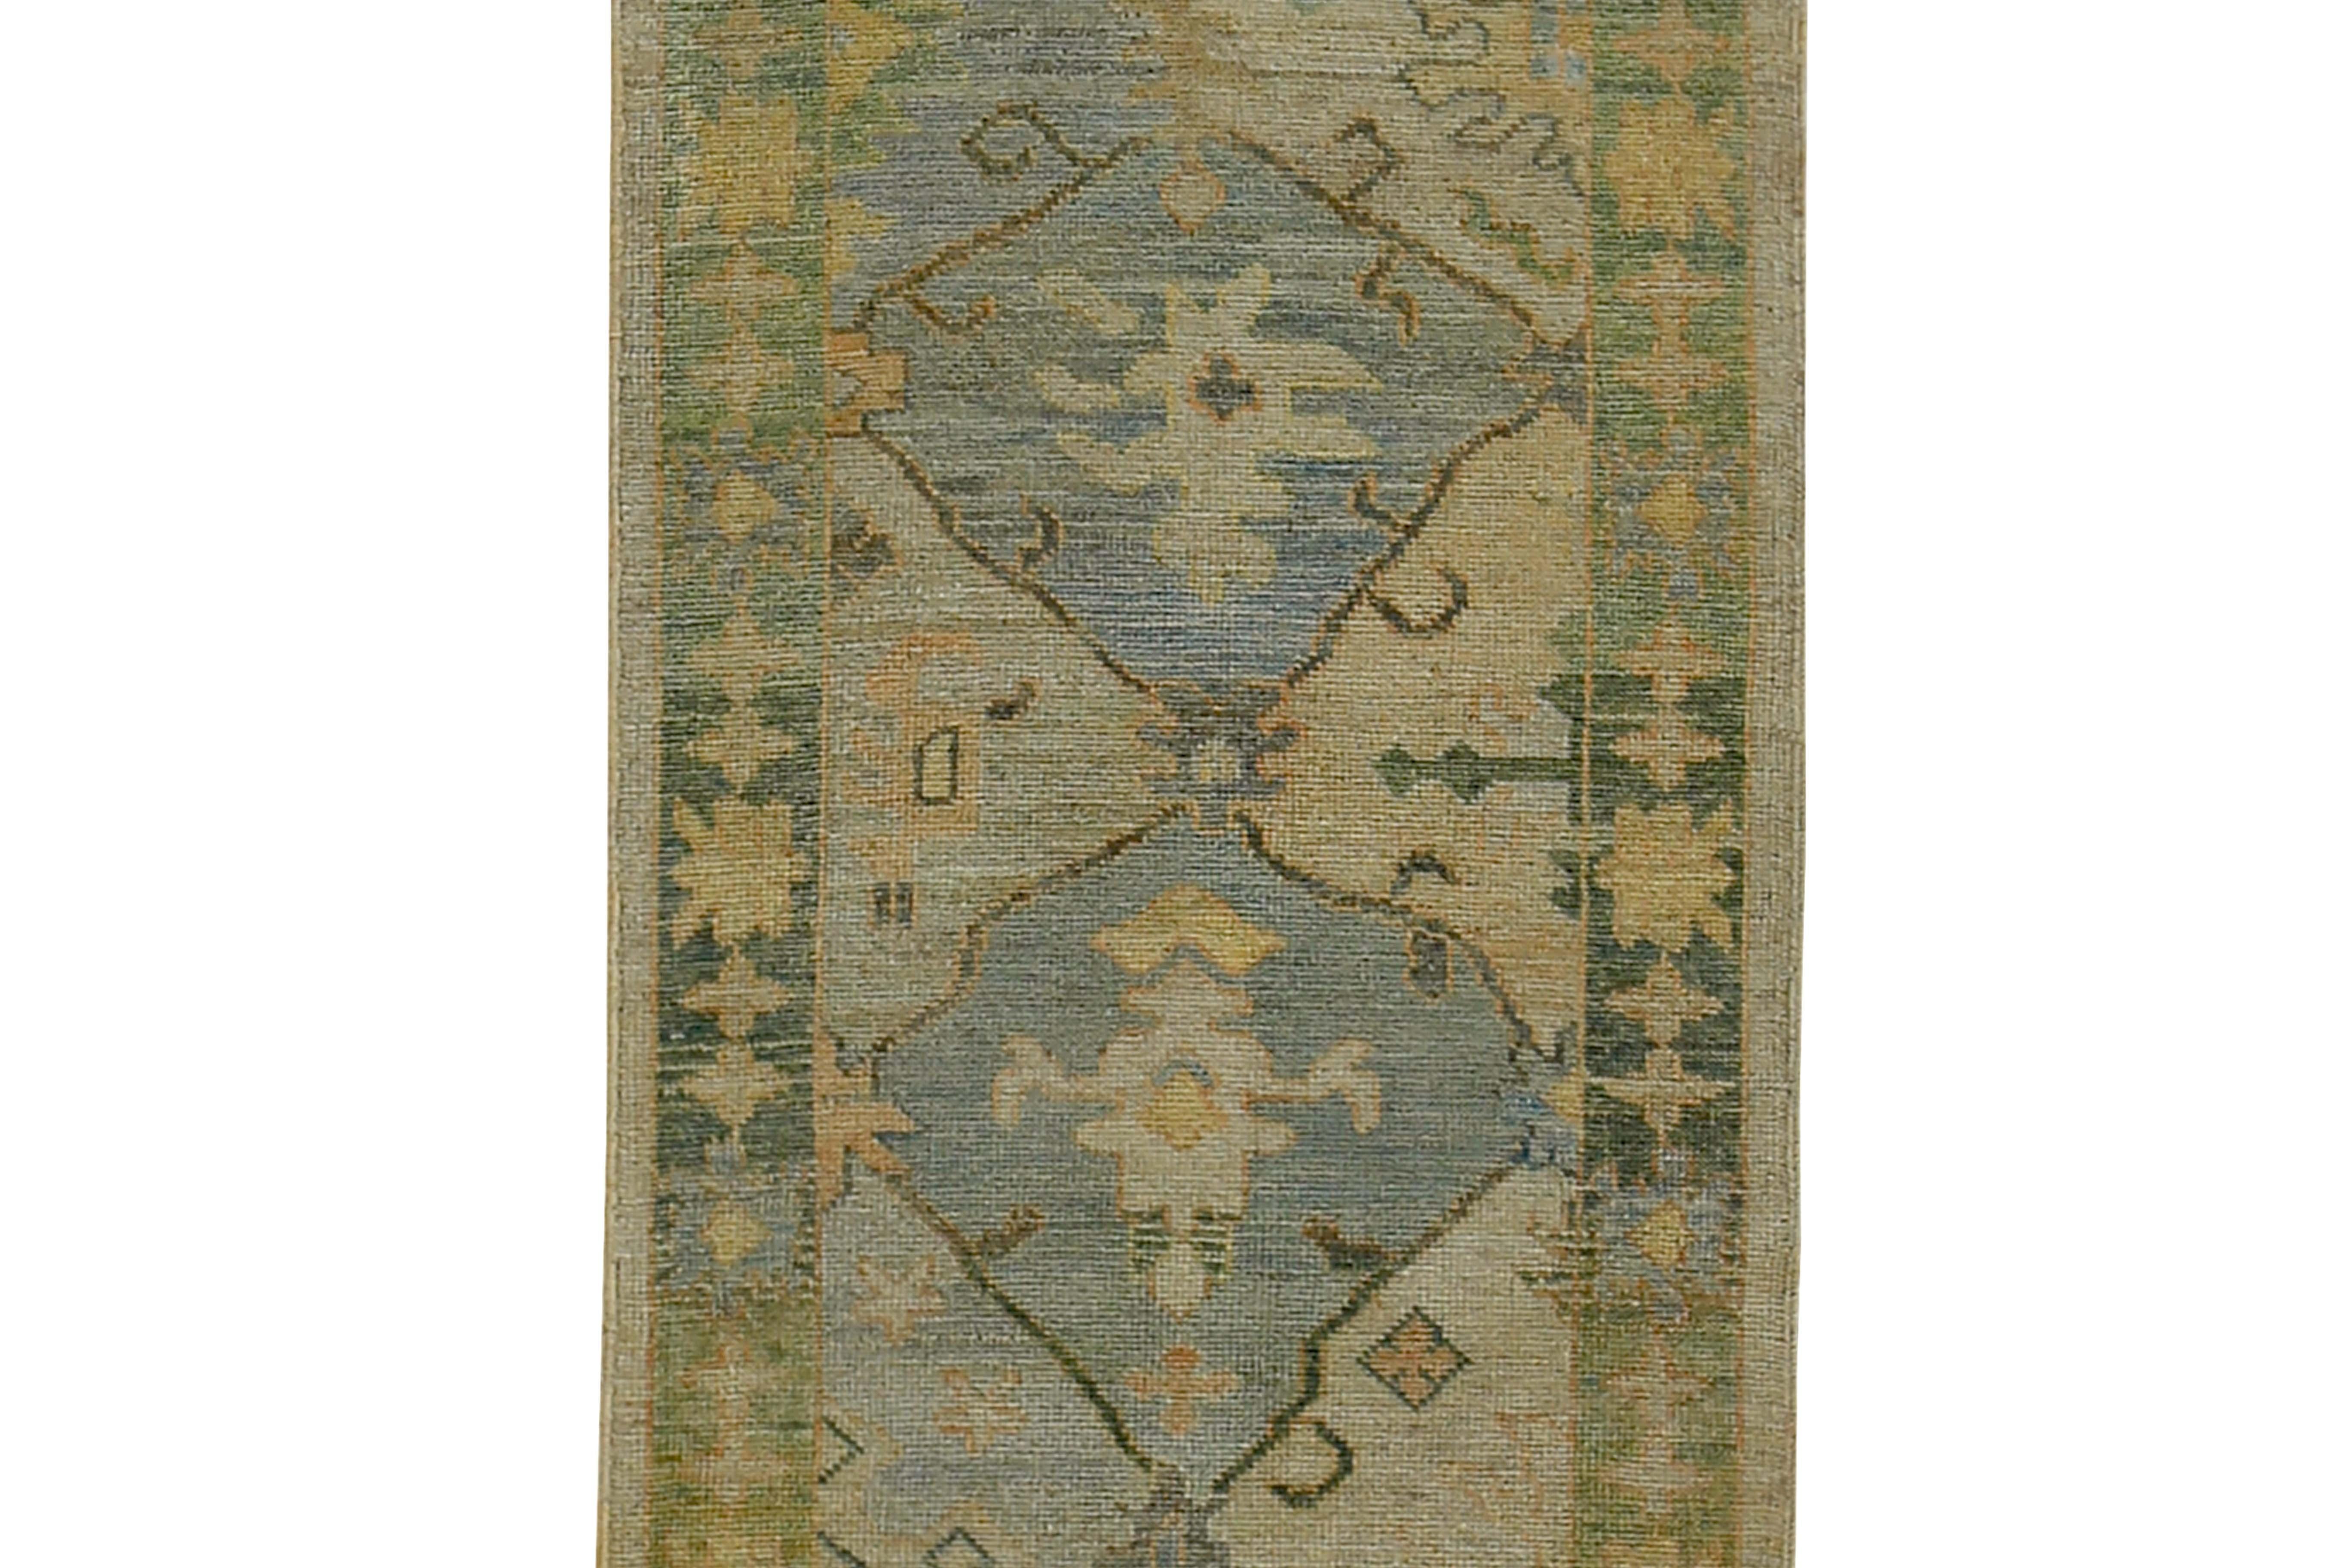 Hand-Woven Turkish Oushak Runner Rug with Blue Floral Patterns on Brown and Green Field For Sale